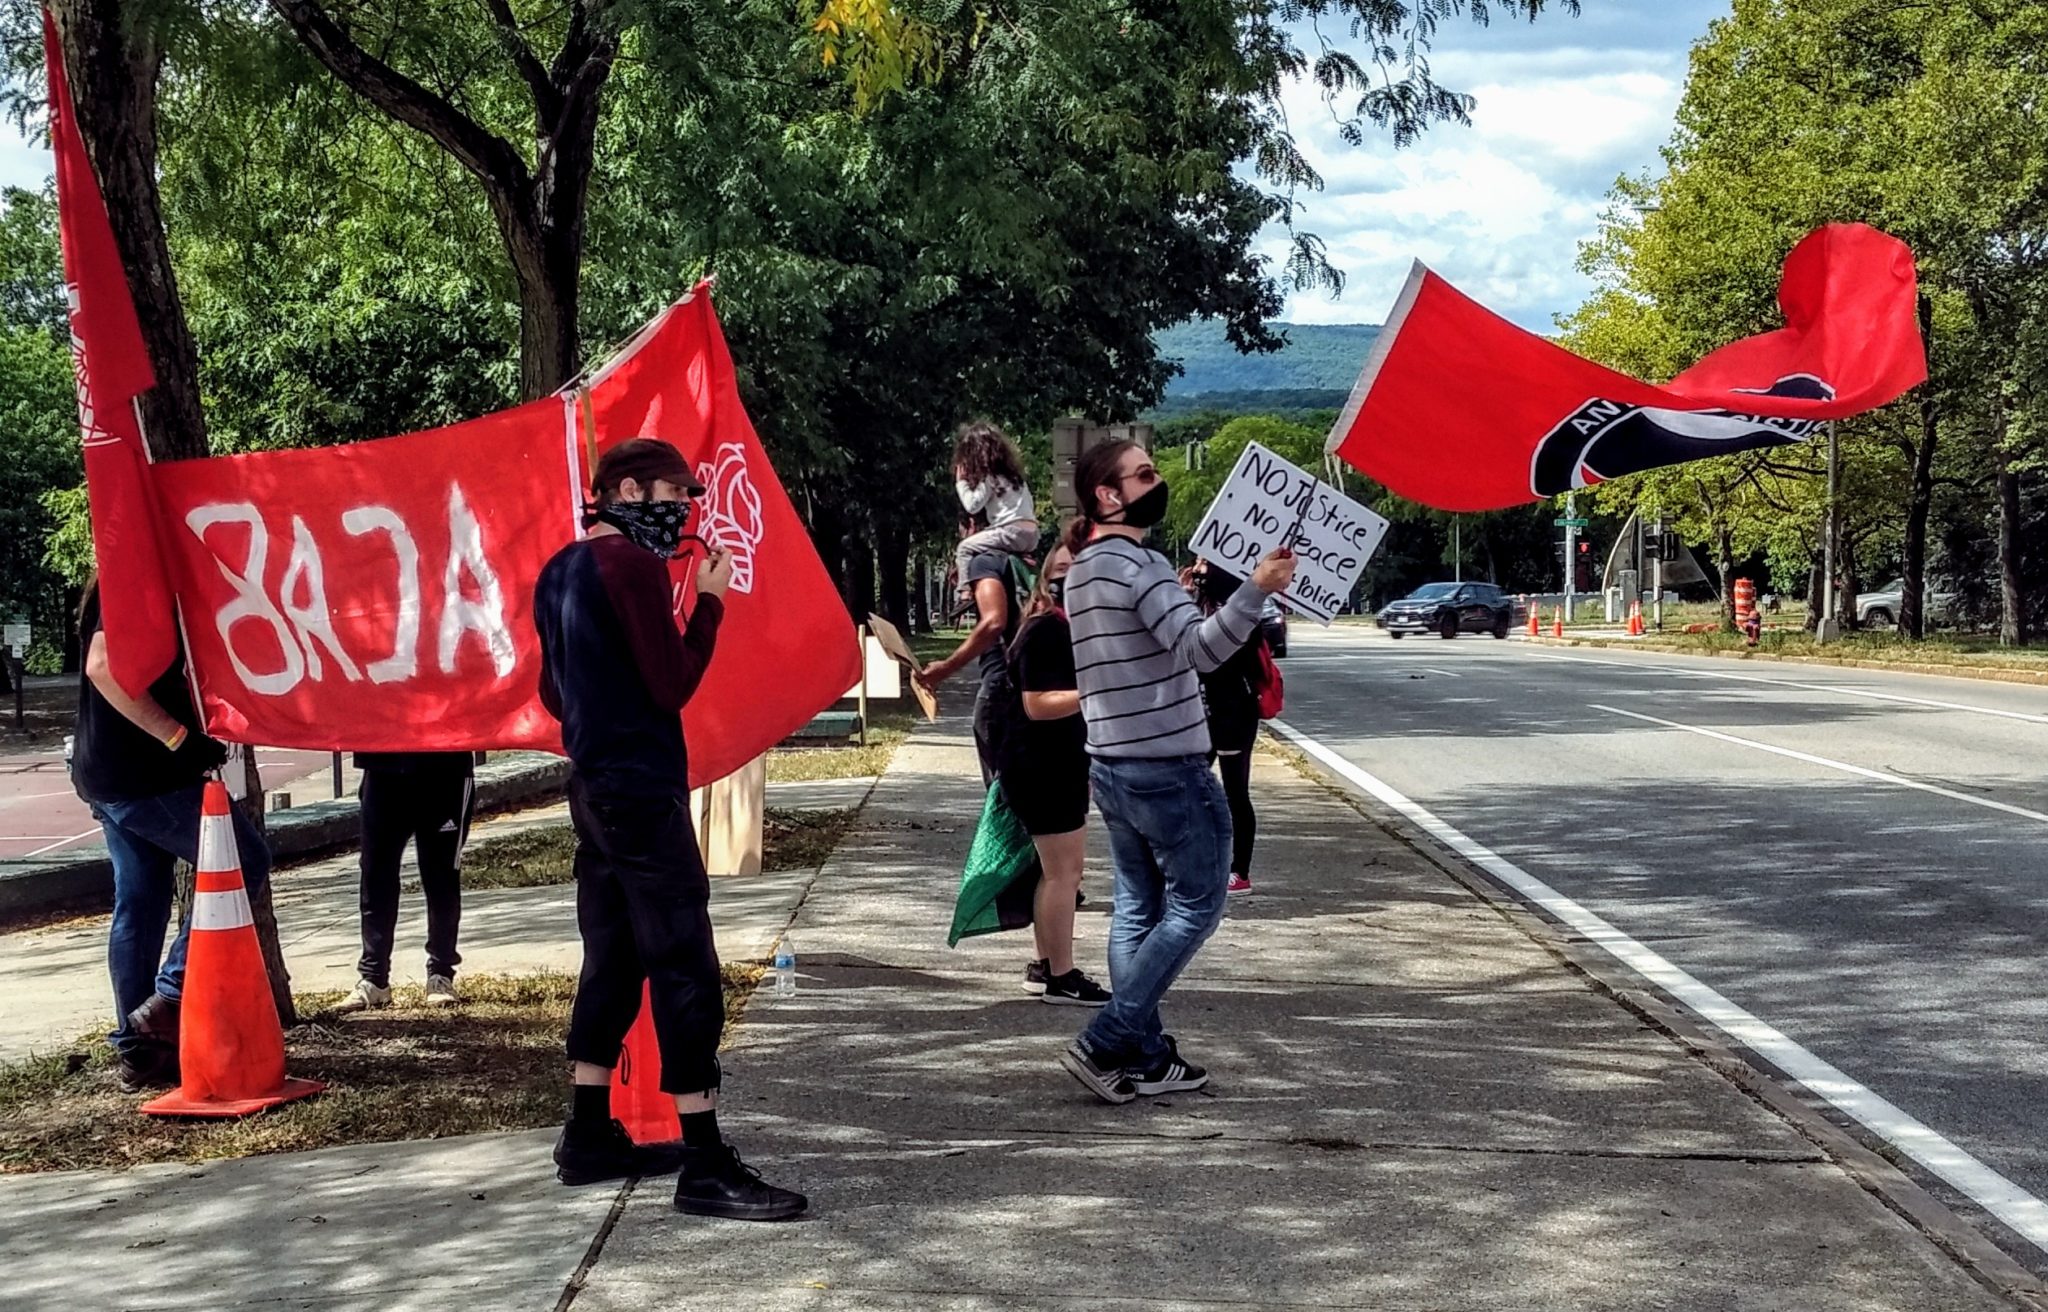 Antifa and BLM protest in Poughkeepsie - Mid Hudson News